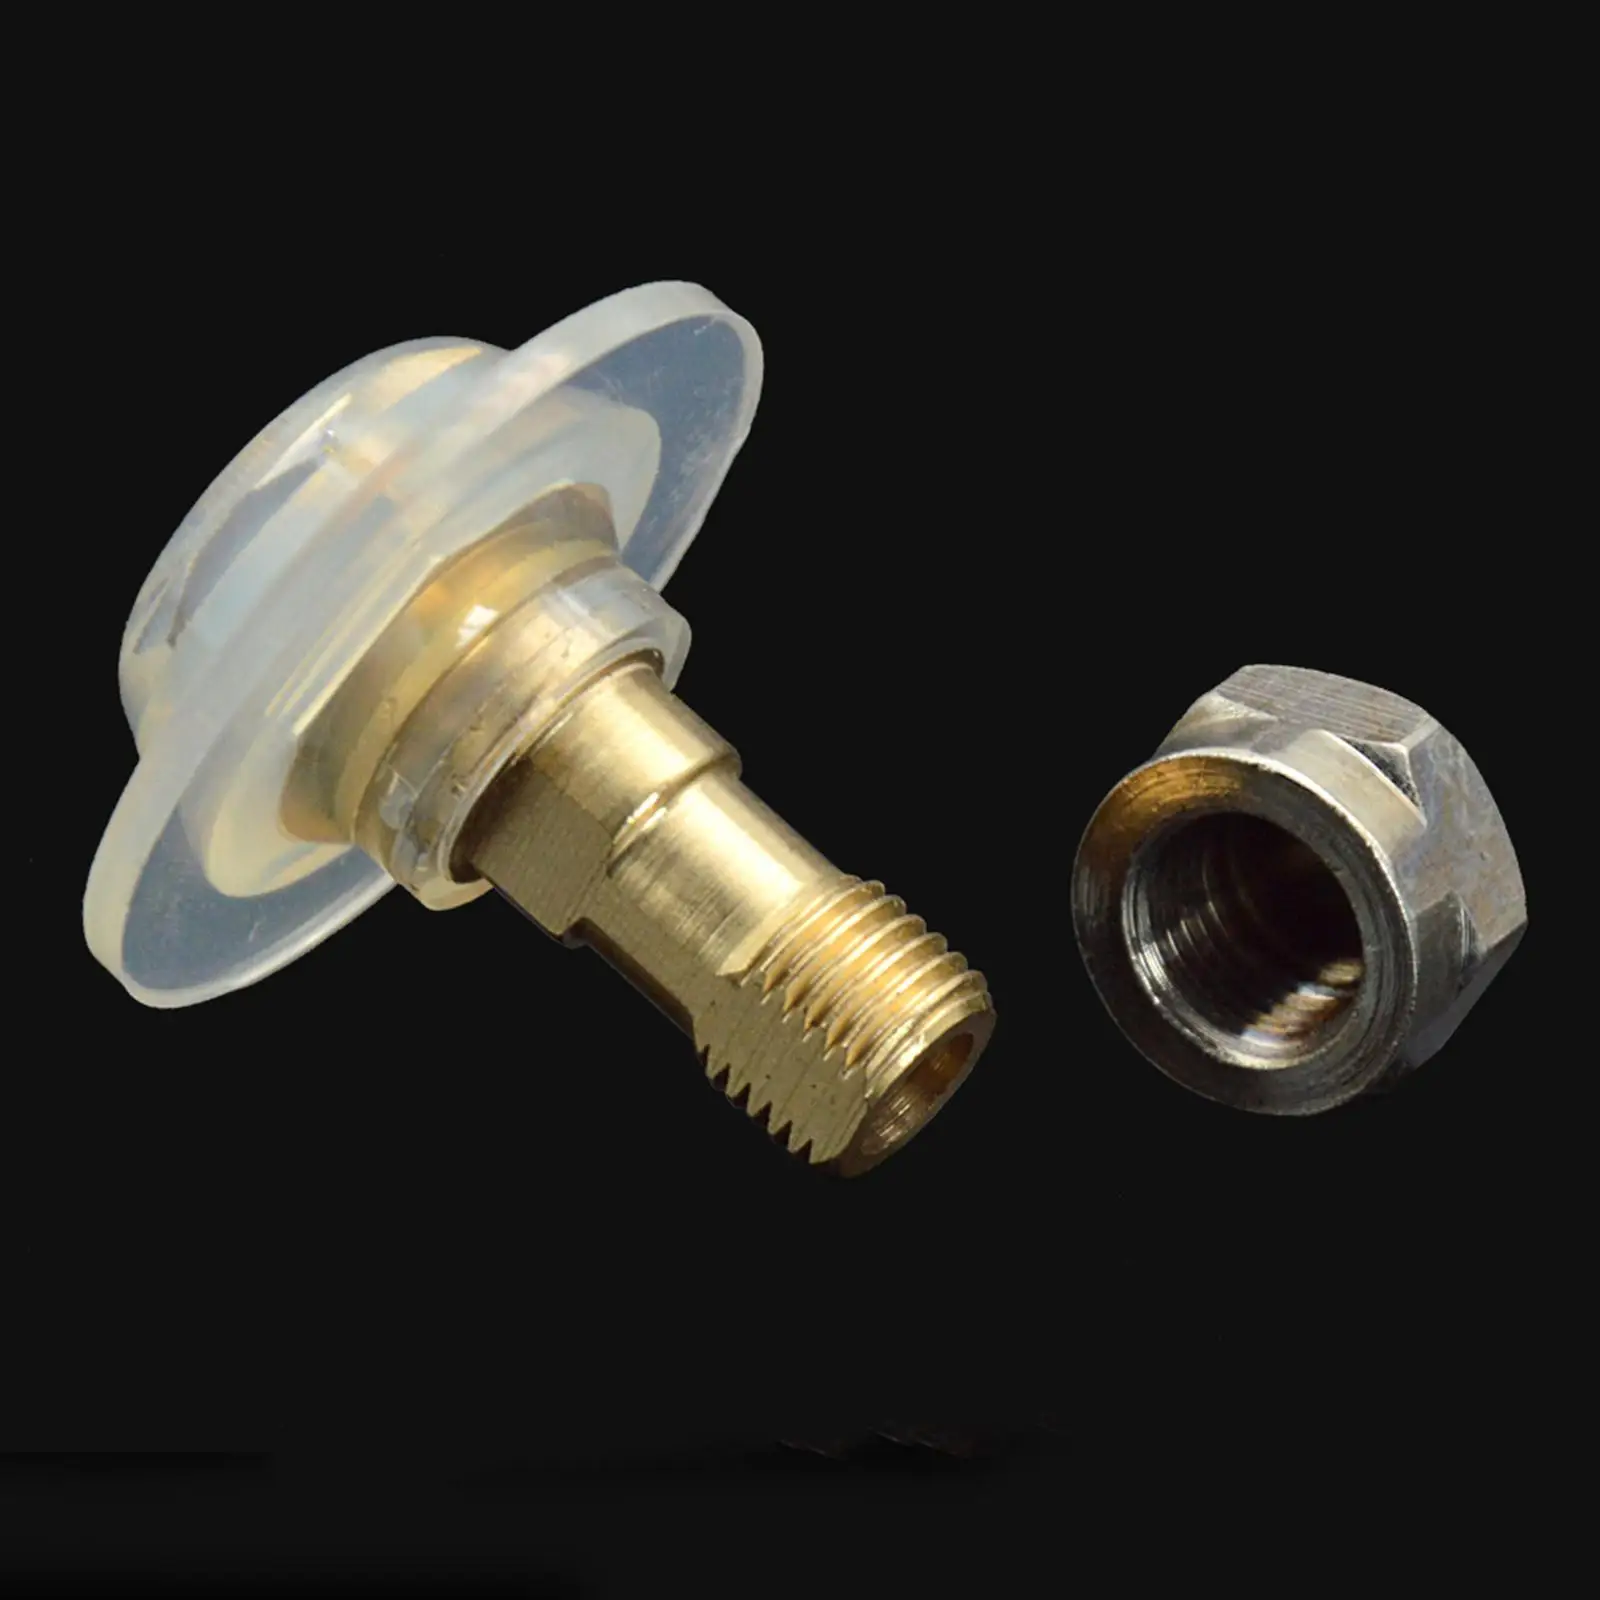 Air Jacket Inflatable Brass Nozzle for Air Jacket Vest Inflatable Accessory